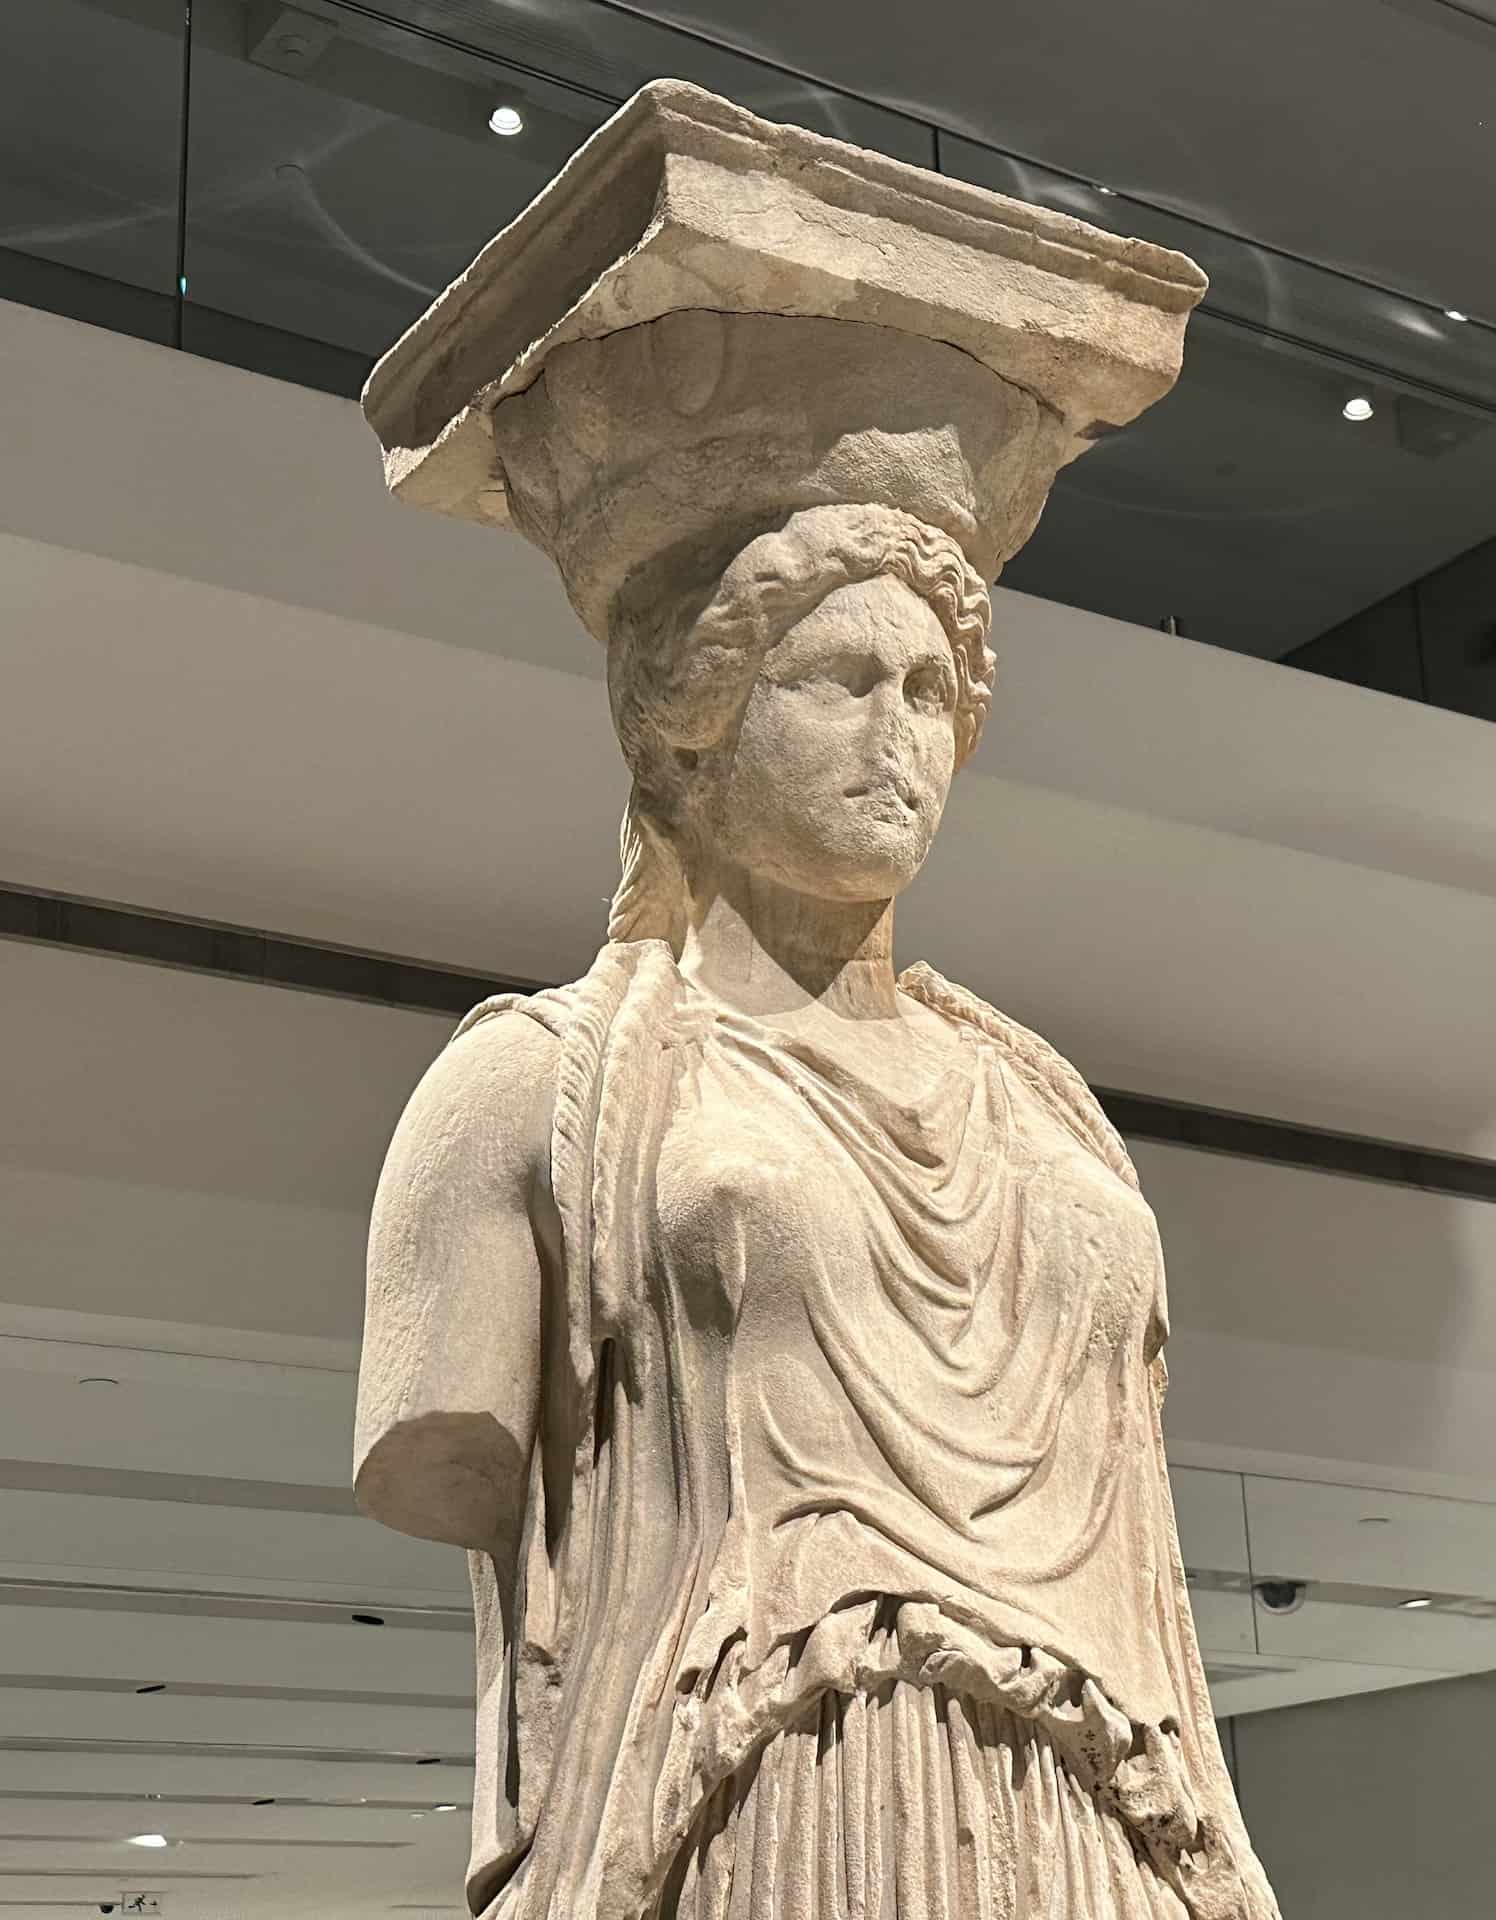 Caryatid at the Acropolis Museum in Athens, Greece